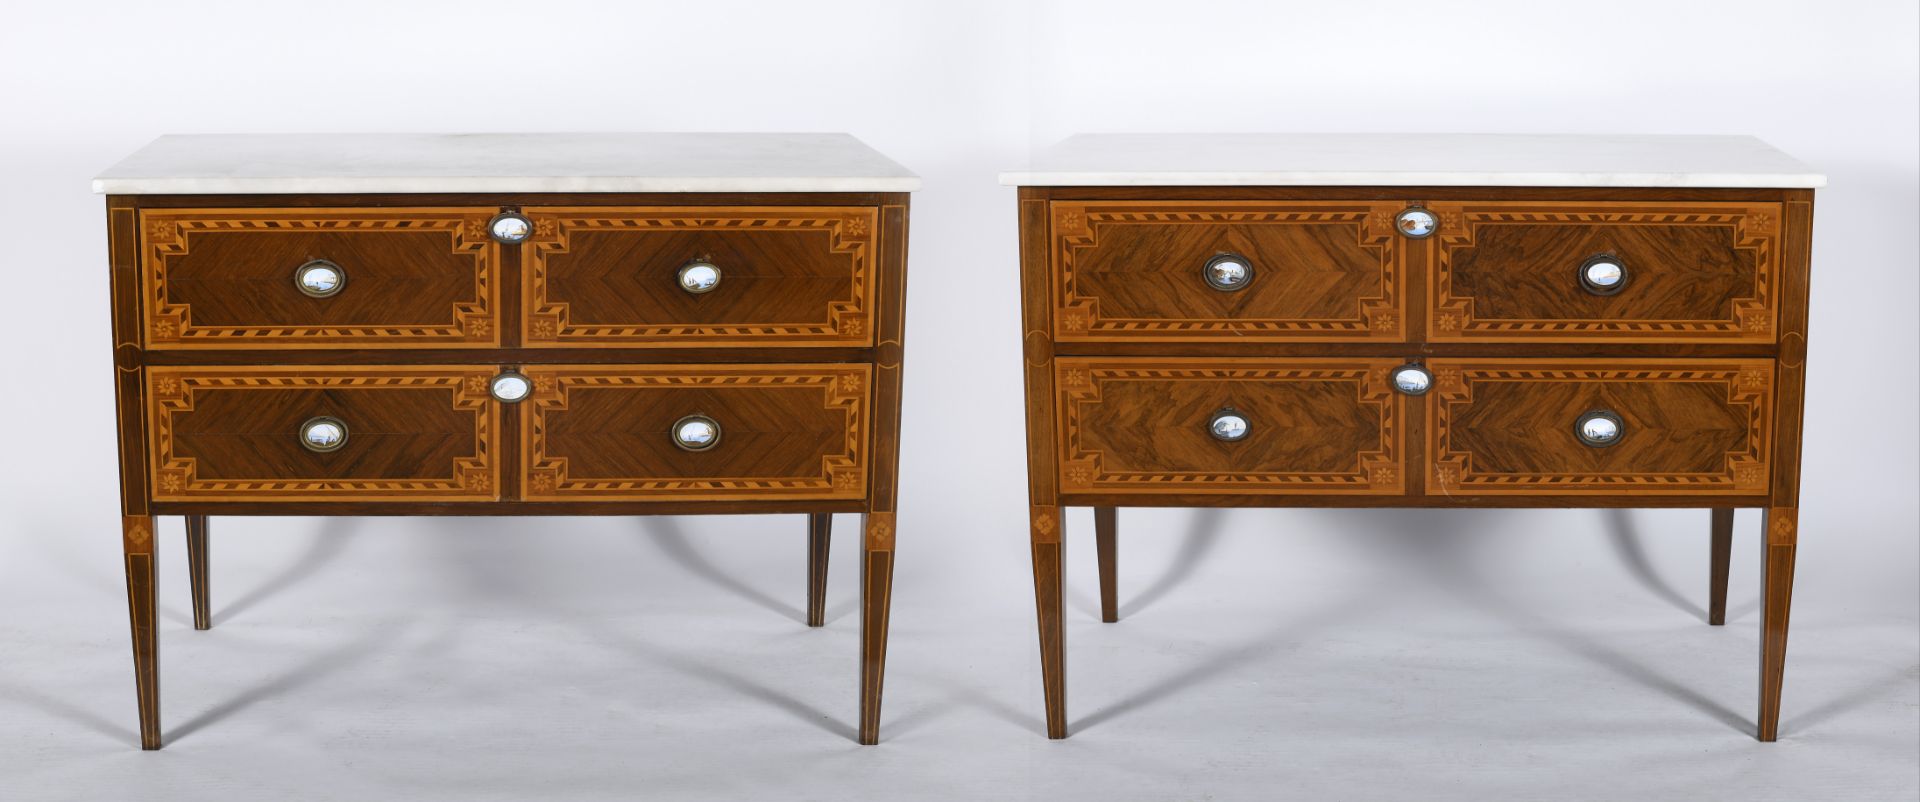 A pair of commodes